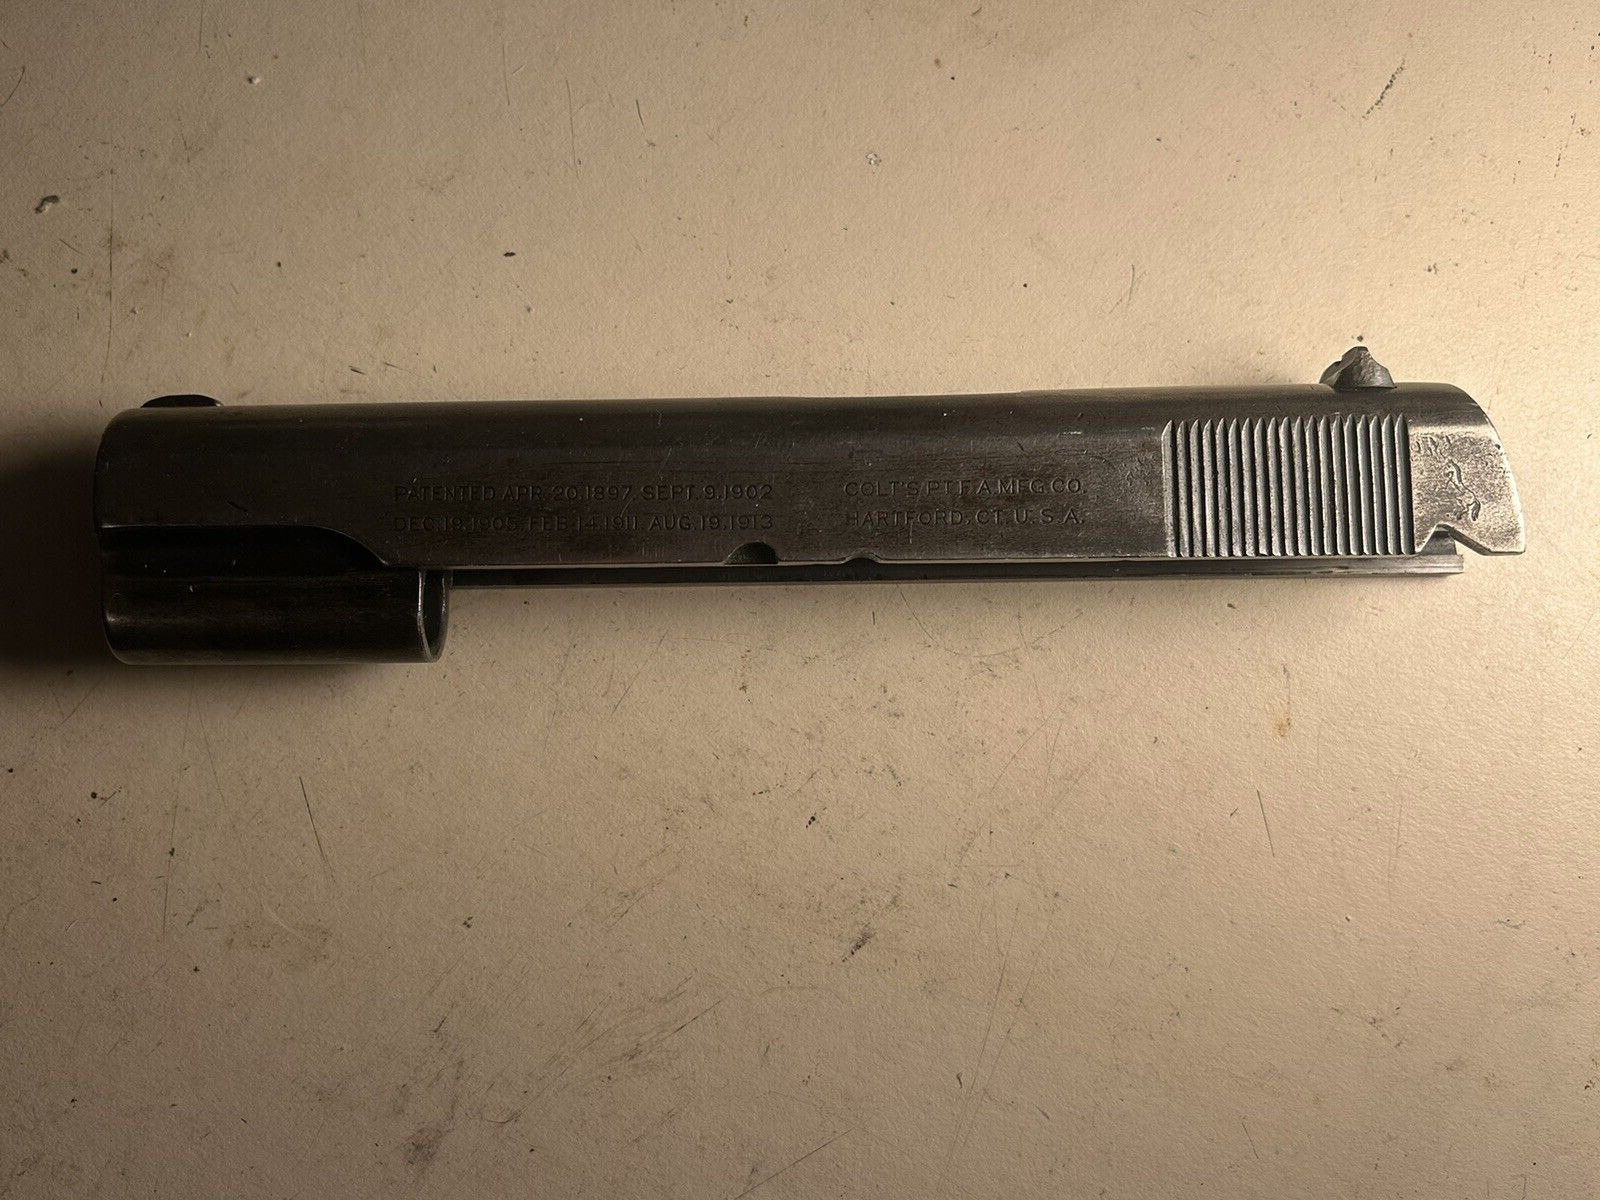 Colt 1911 WWI  .45ACP Pistol Slide Assembly with firing pin